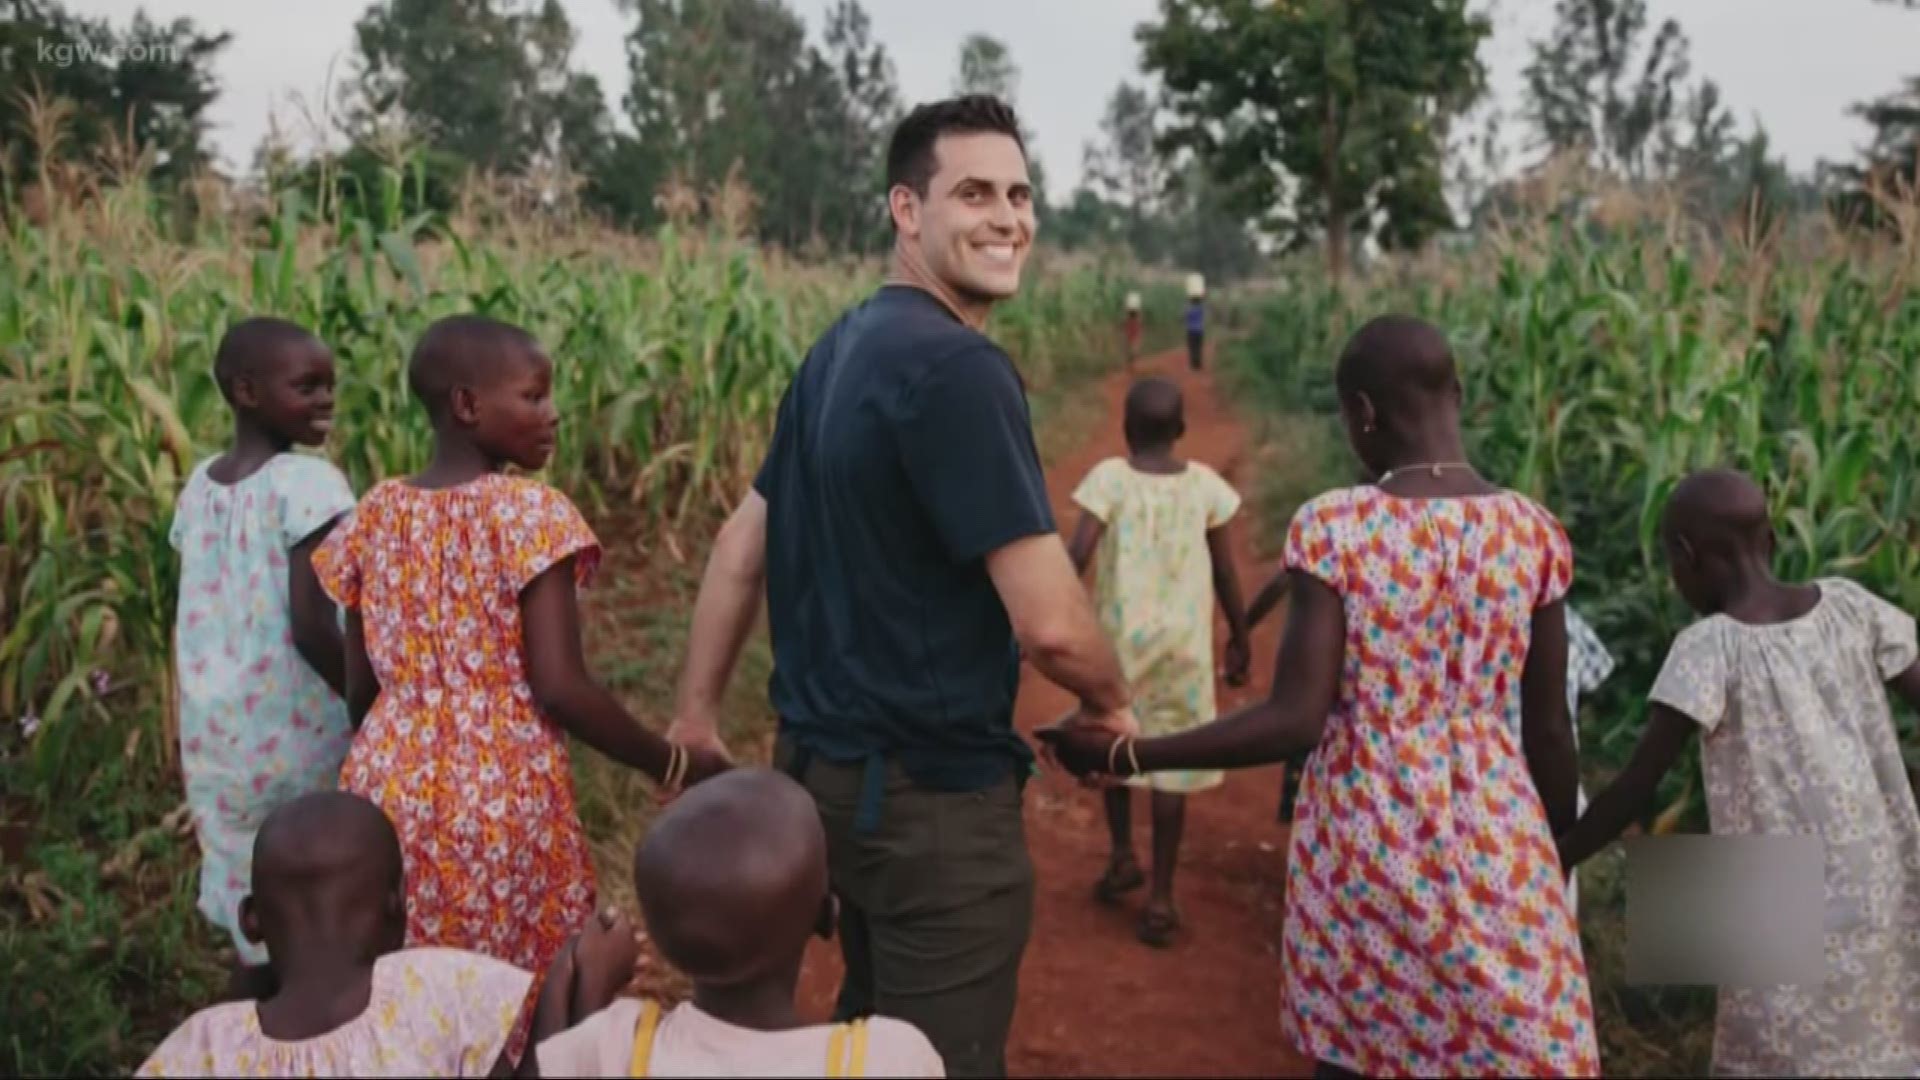 Matt Boyd and his wife Ashley, both Oregon State grads, have started a program in Uganda that keeps girls safe from sex traffickers.